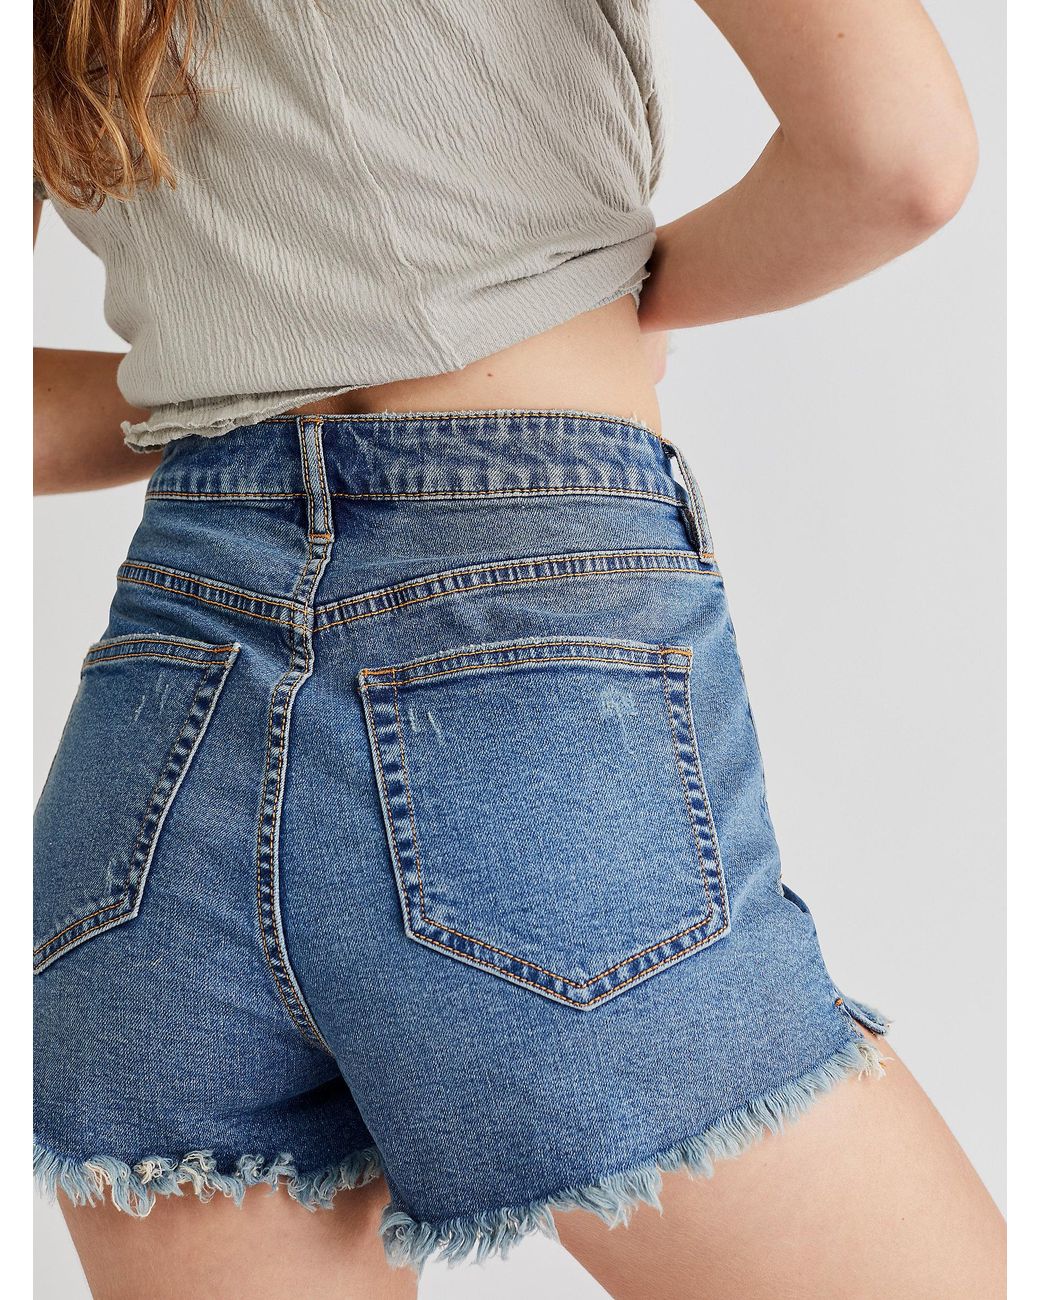 Free People Crvy Vintage High-rise Shorts in Blue | Lyst